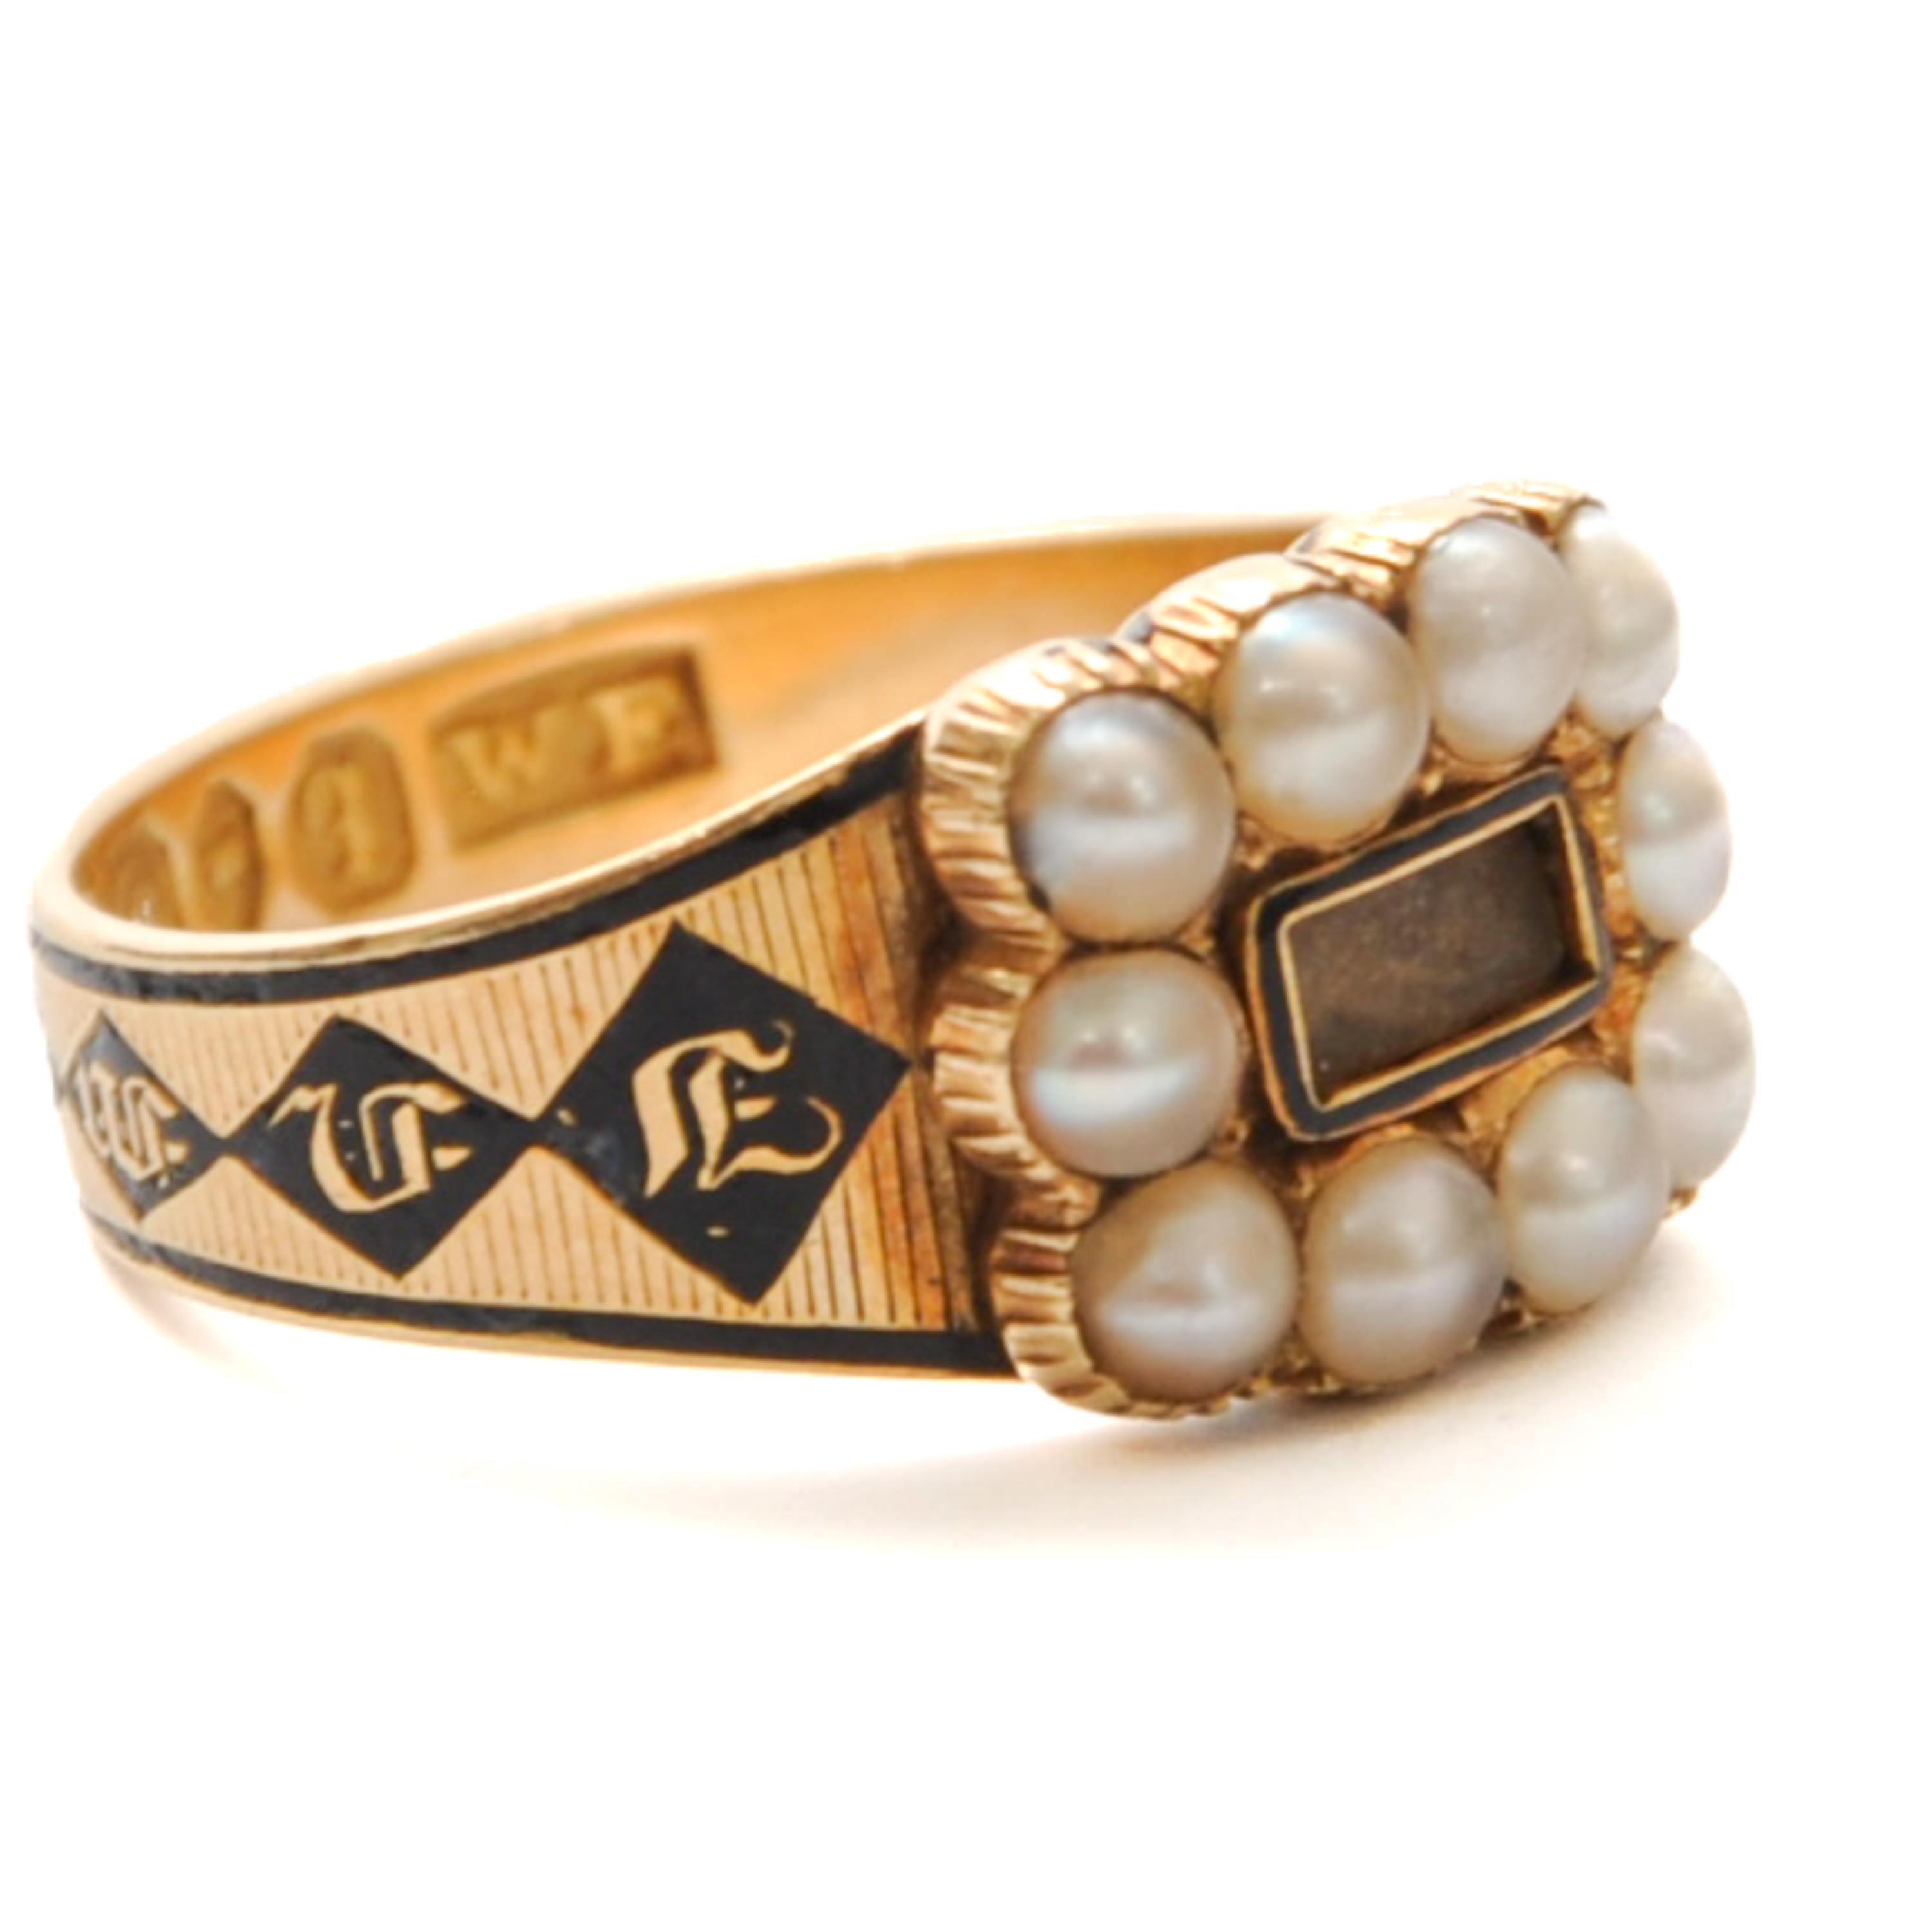 Round Cut Antique English 18K Gold Memorial Ring from 1831 with Pearls and Black Enamel For Sale